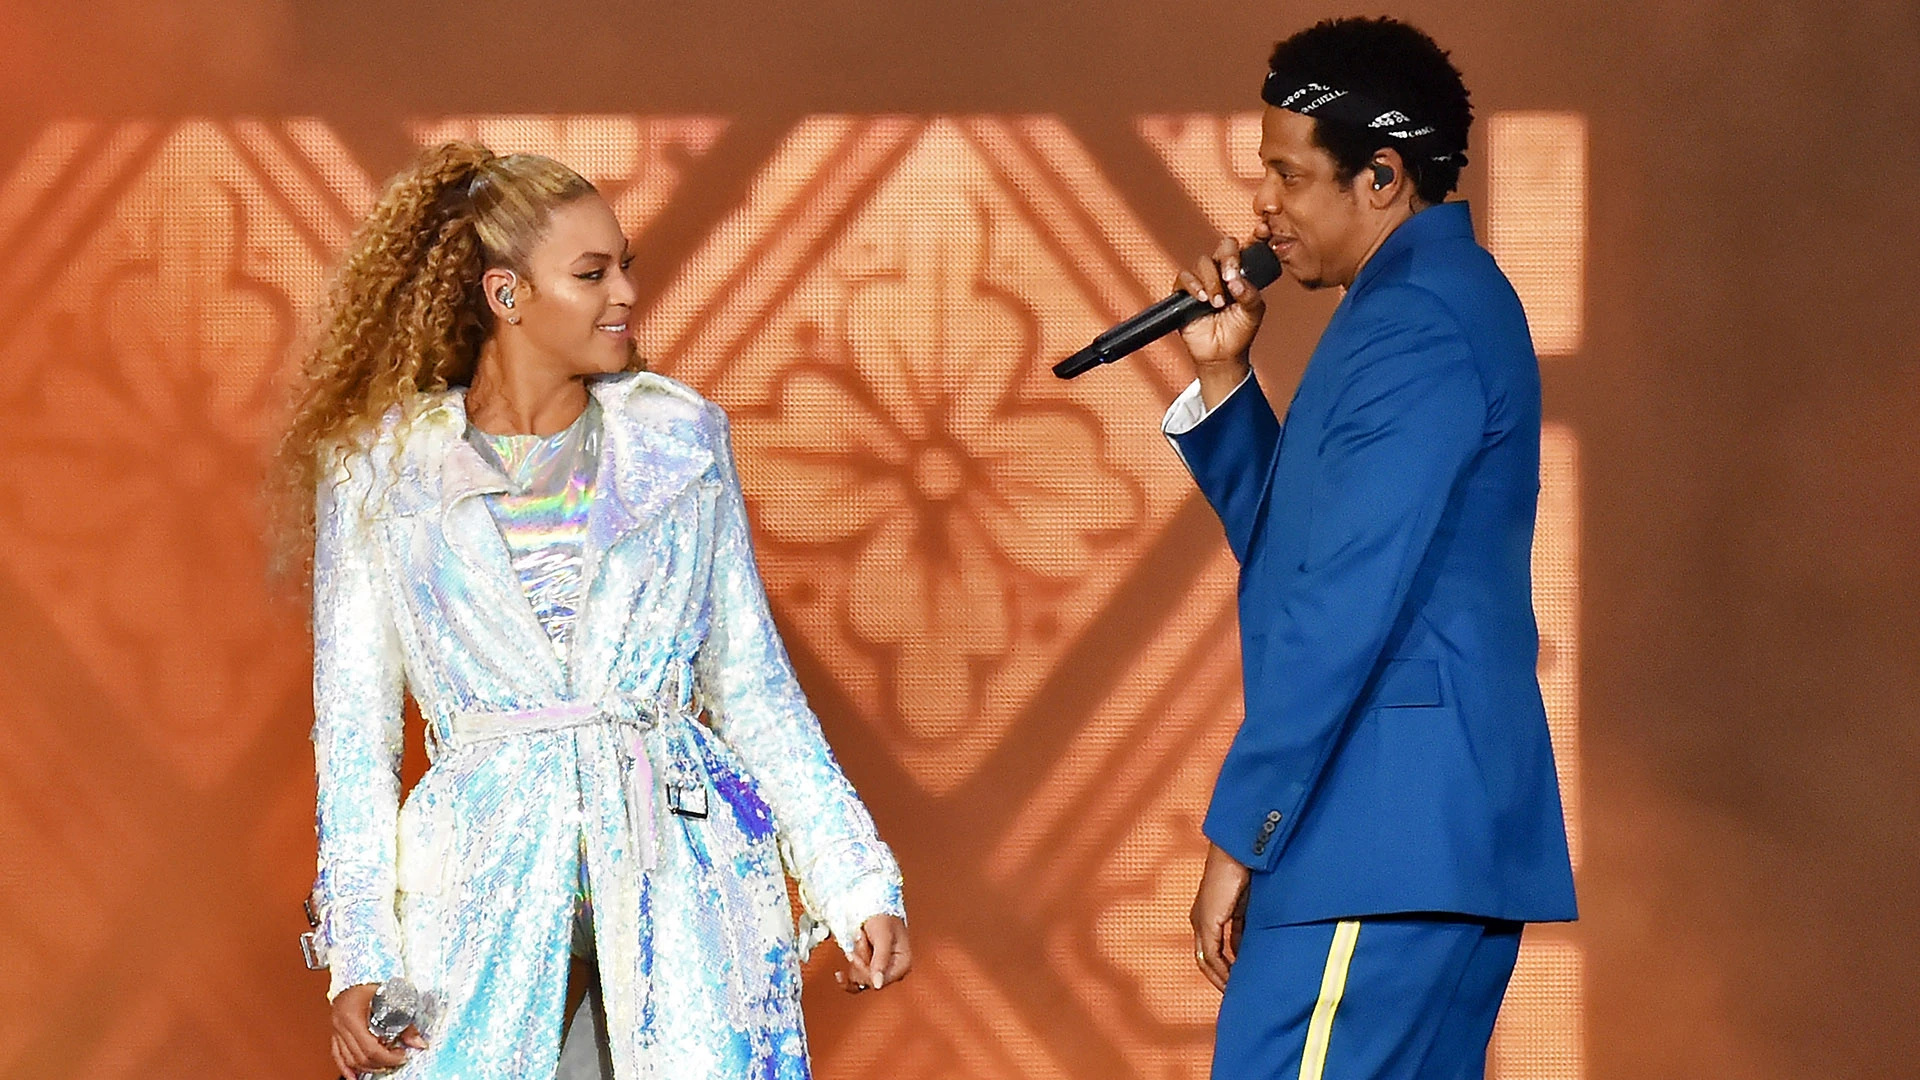 Beyonce's reaction, Jay-Z scaring her, Mid song surprise, Stylecaster, 1920x1080 Full HD Desktop